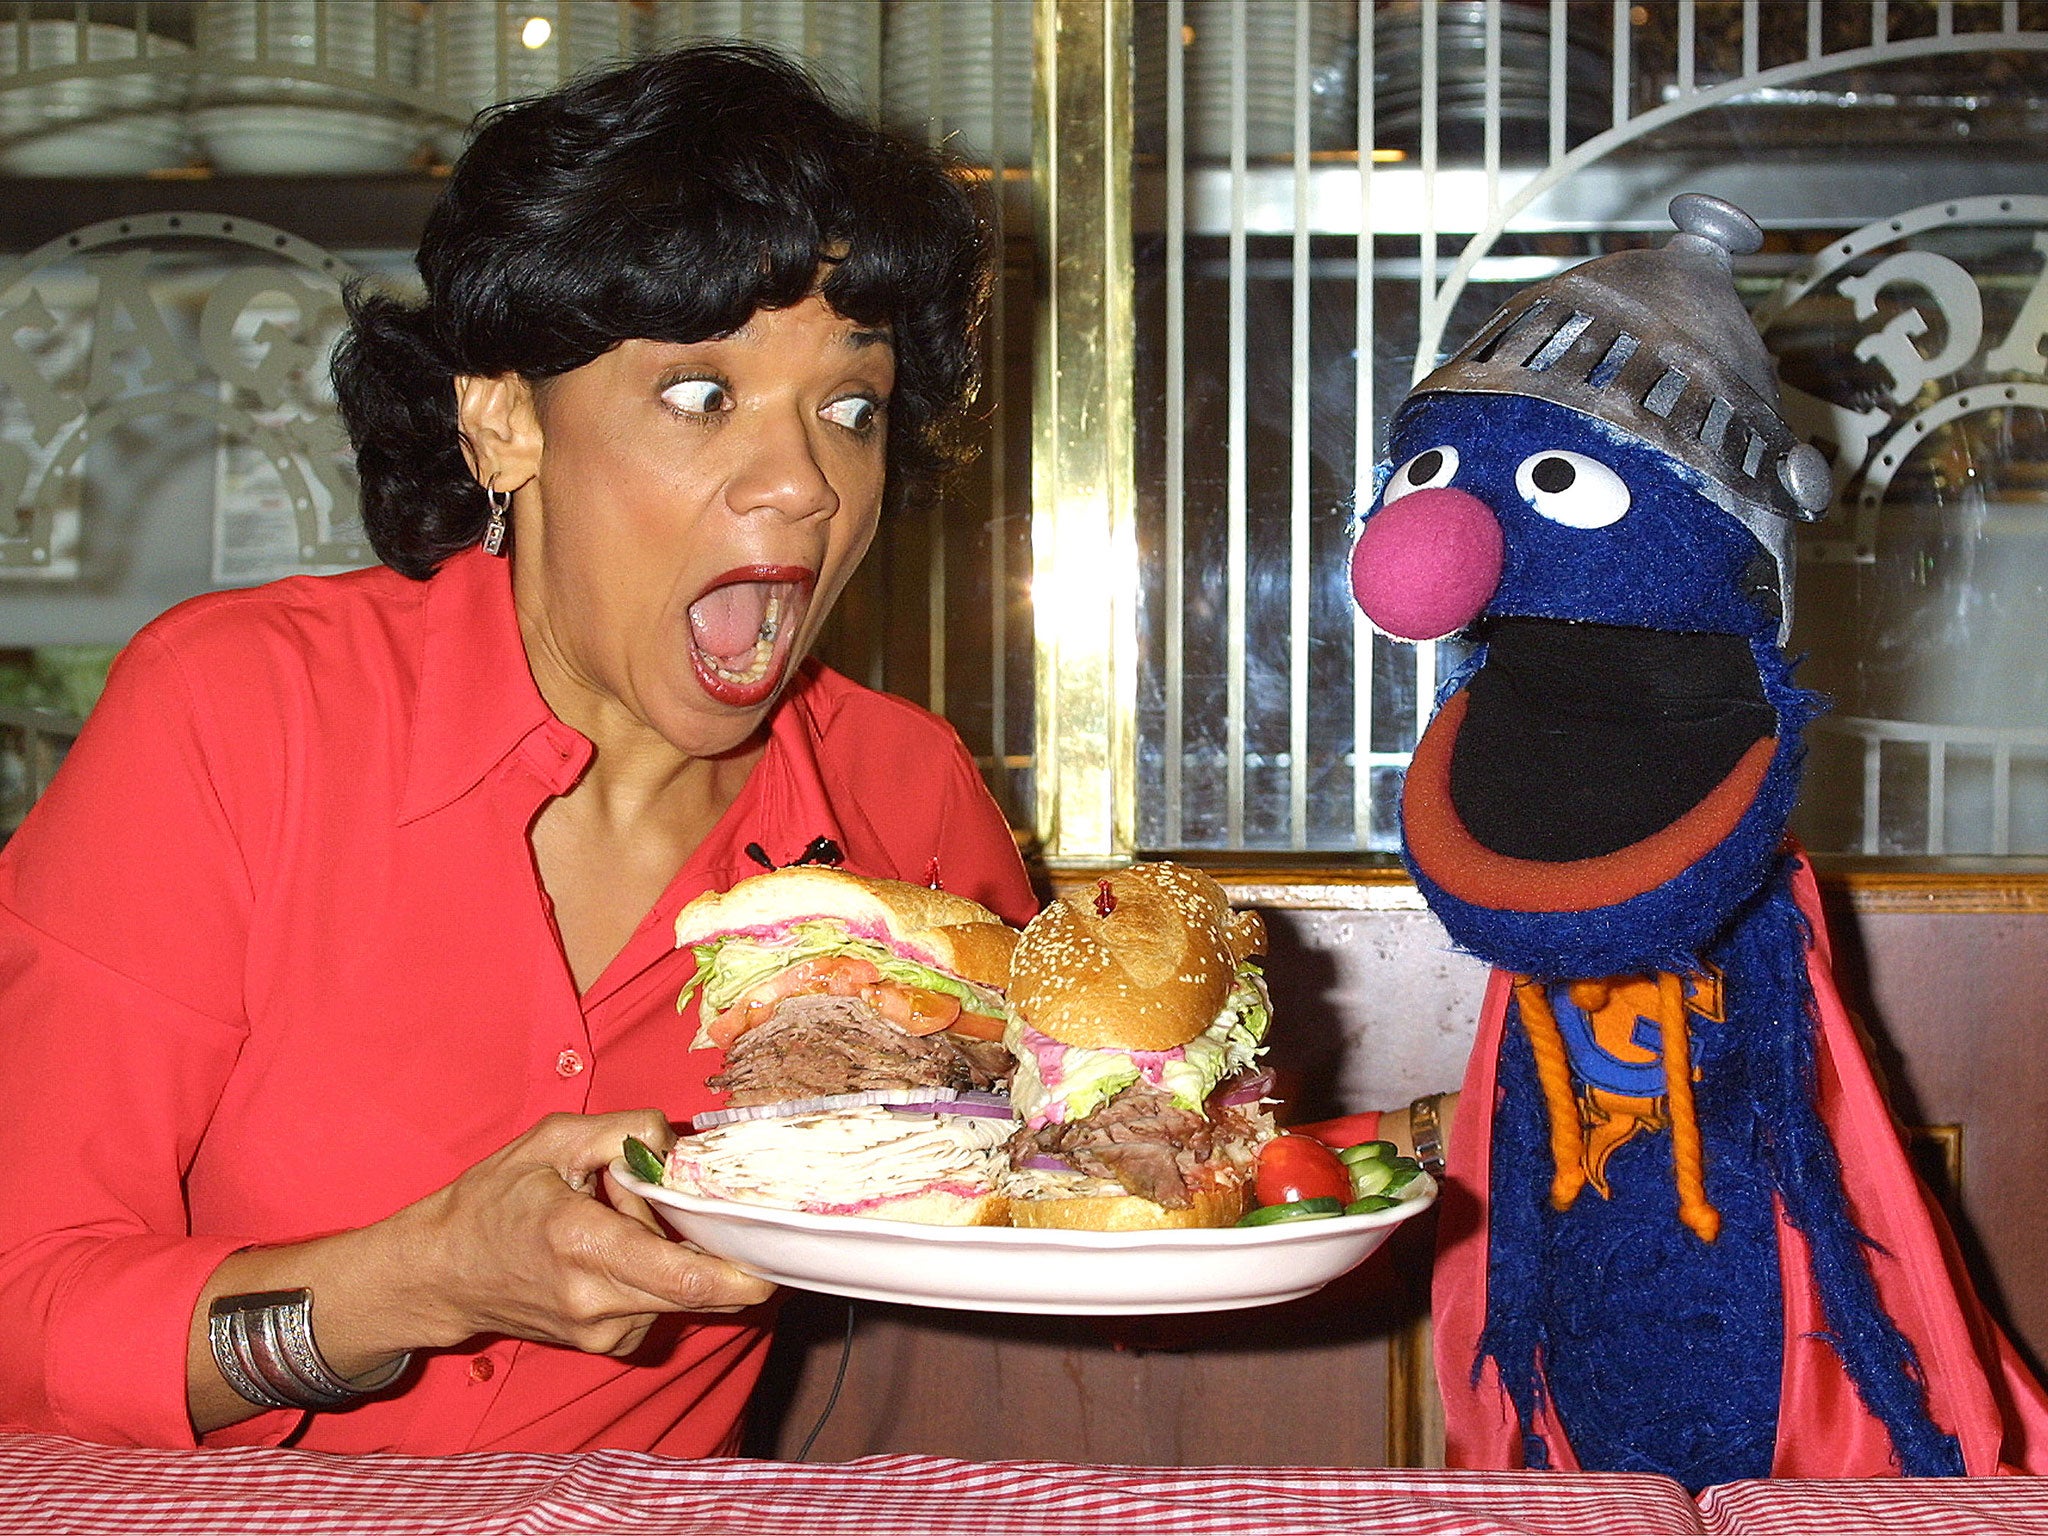 Sonia Manzano with Sesame Street character Grover in 2002